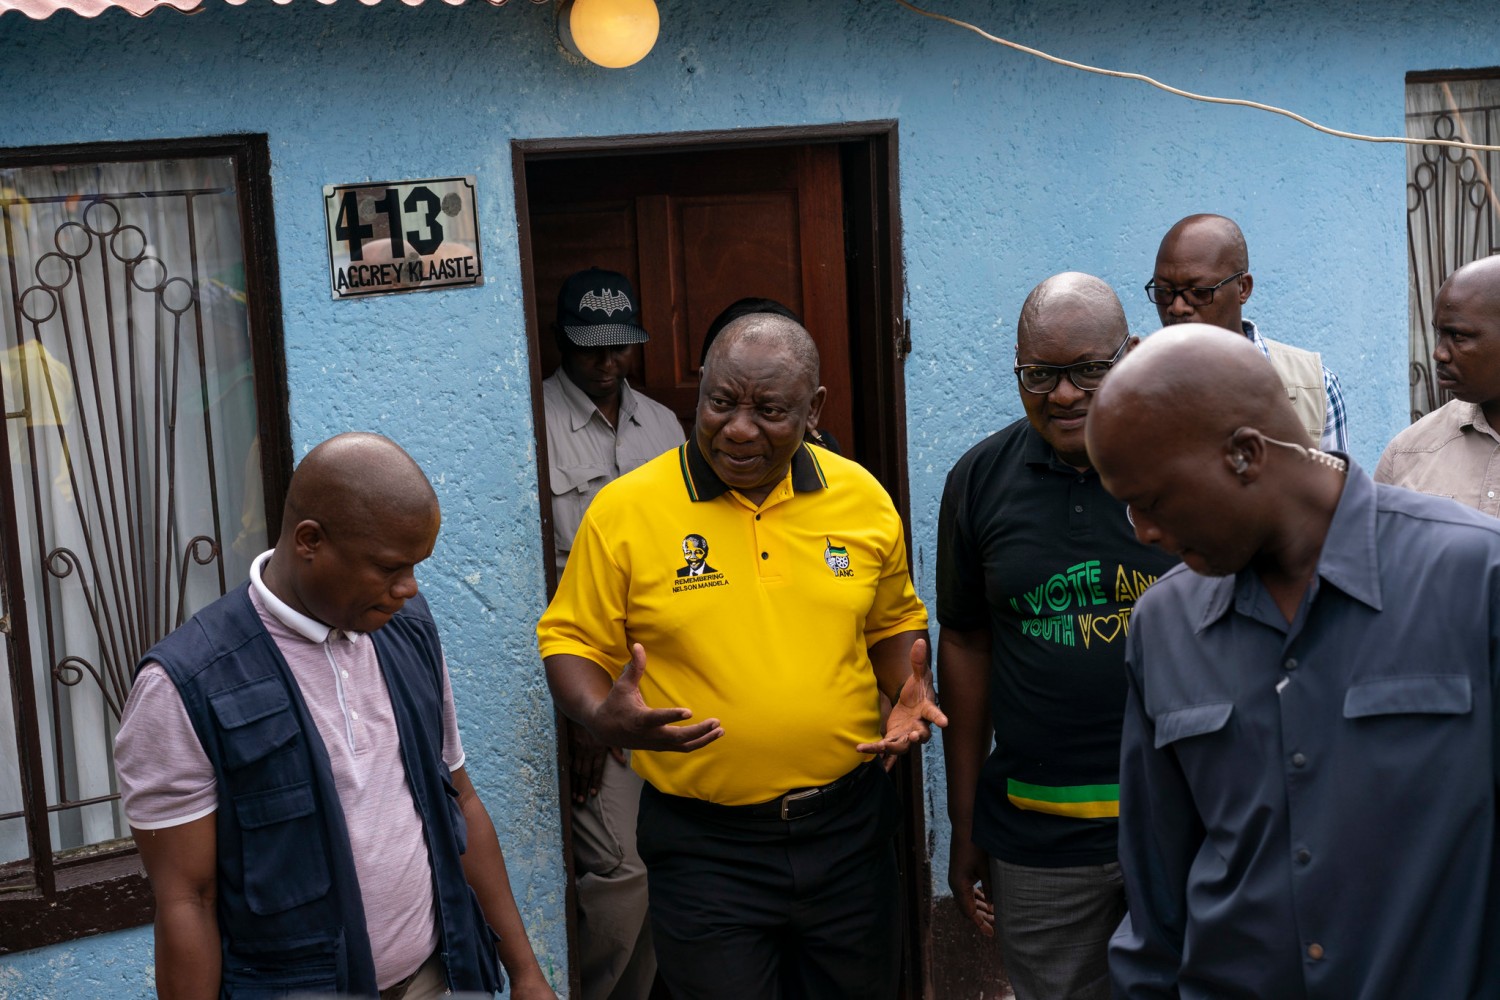 President Cyril Ramaphosa of South Africa, center, campaigning ahead of Wednesday’s election.CreditCreditJoao Silva/The New York Times